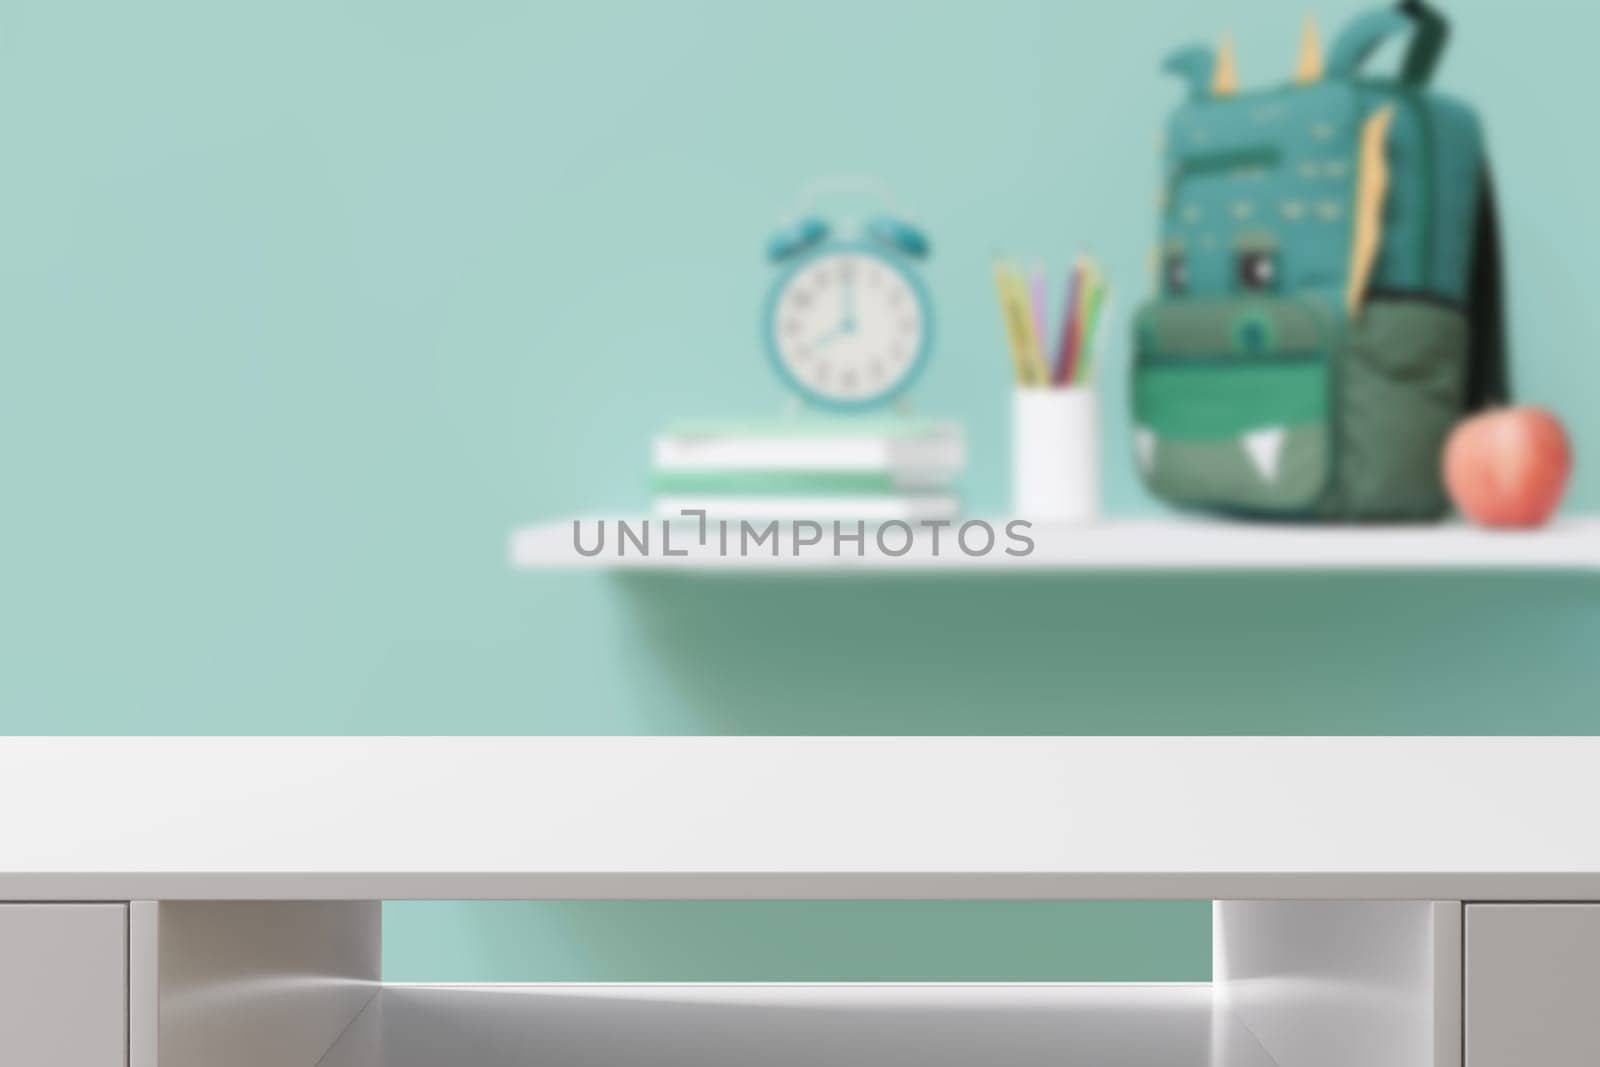 Empty white tabletop foreground with softly blurred background featuring school supplies, perfect for product displays and educational themes. Back to school, education concept. Desk front view. 3D